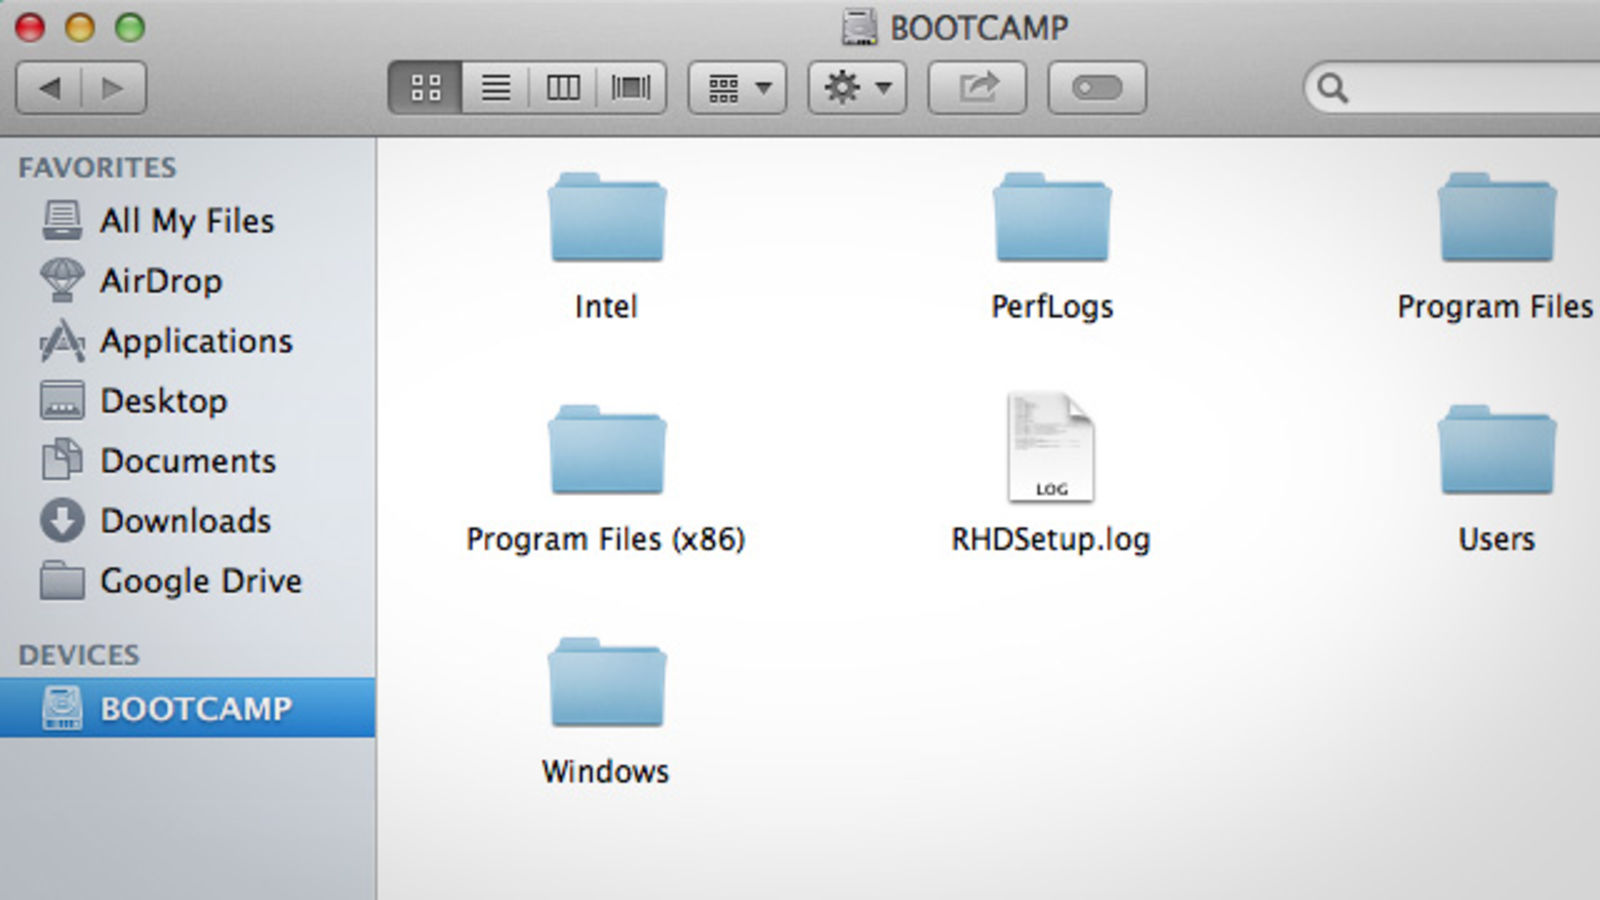 How To Transfer Files From Mac To Boot Camp